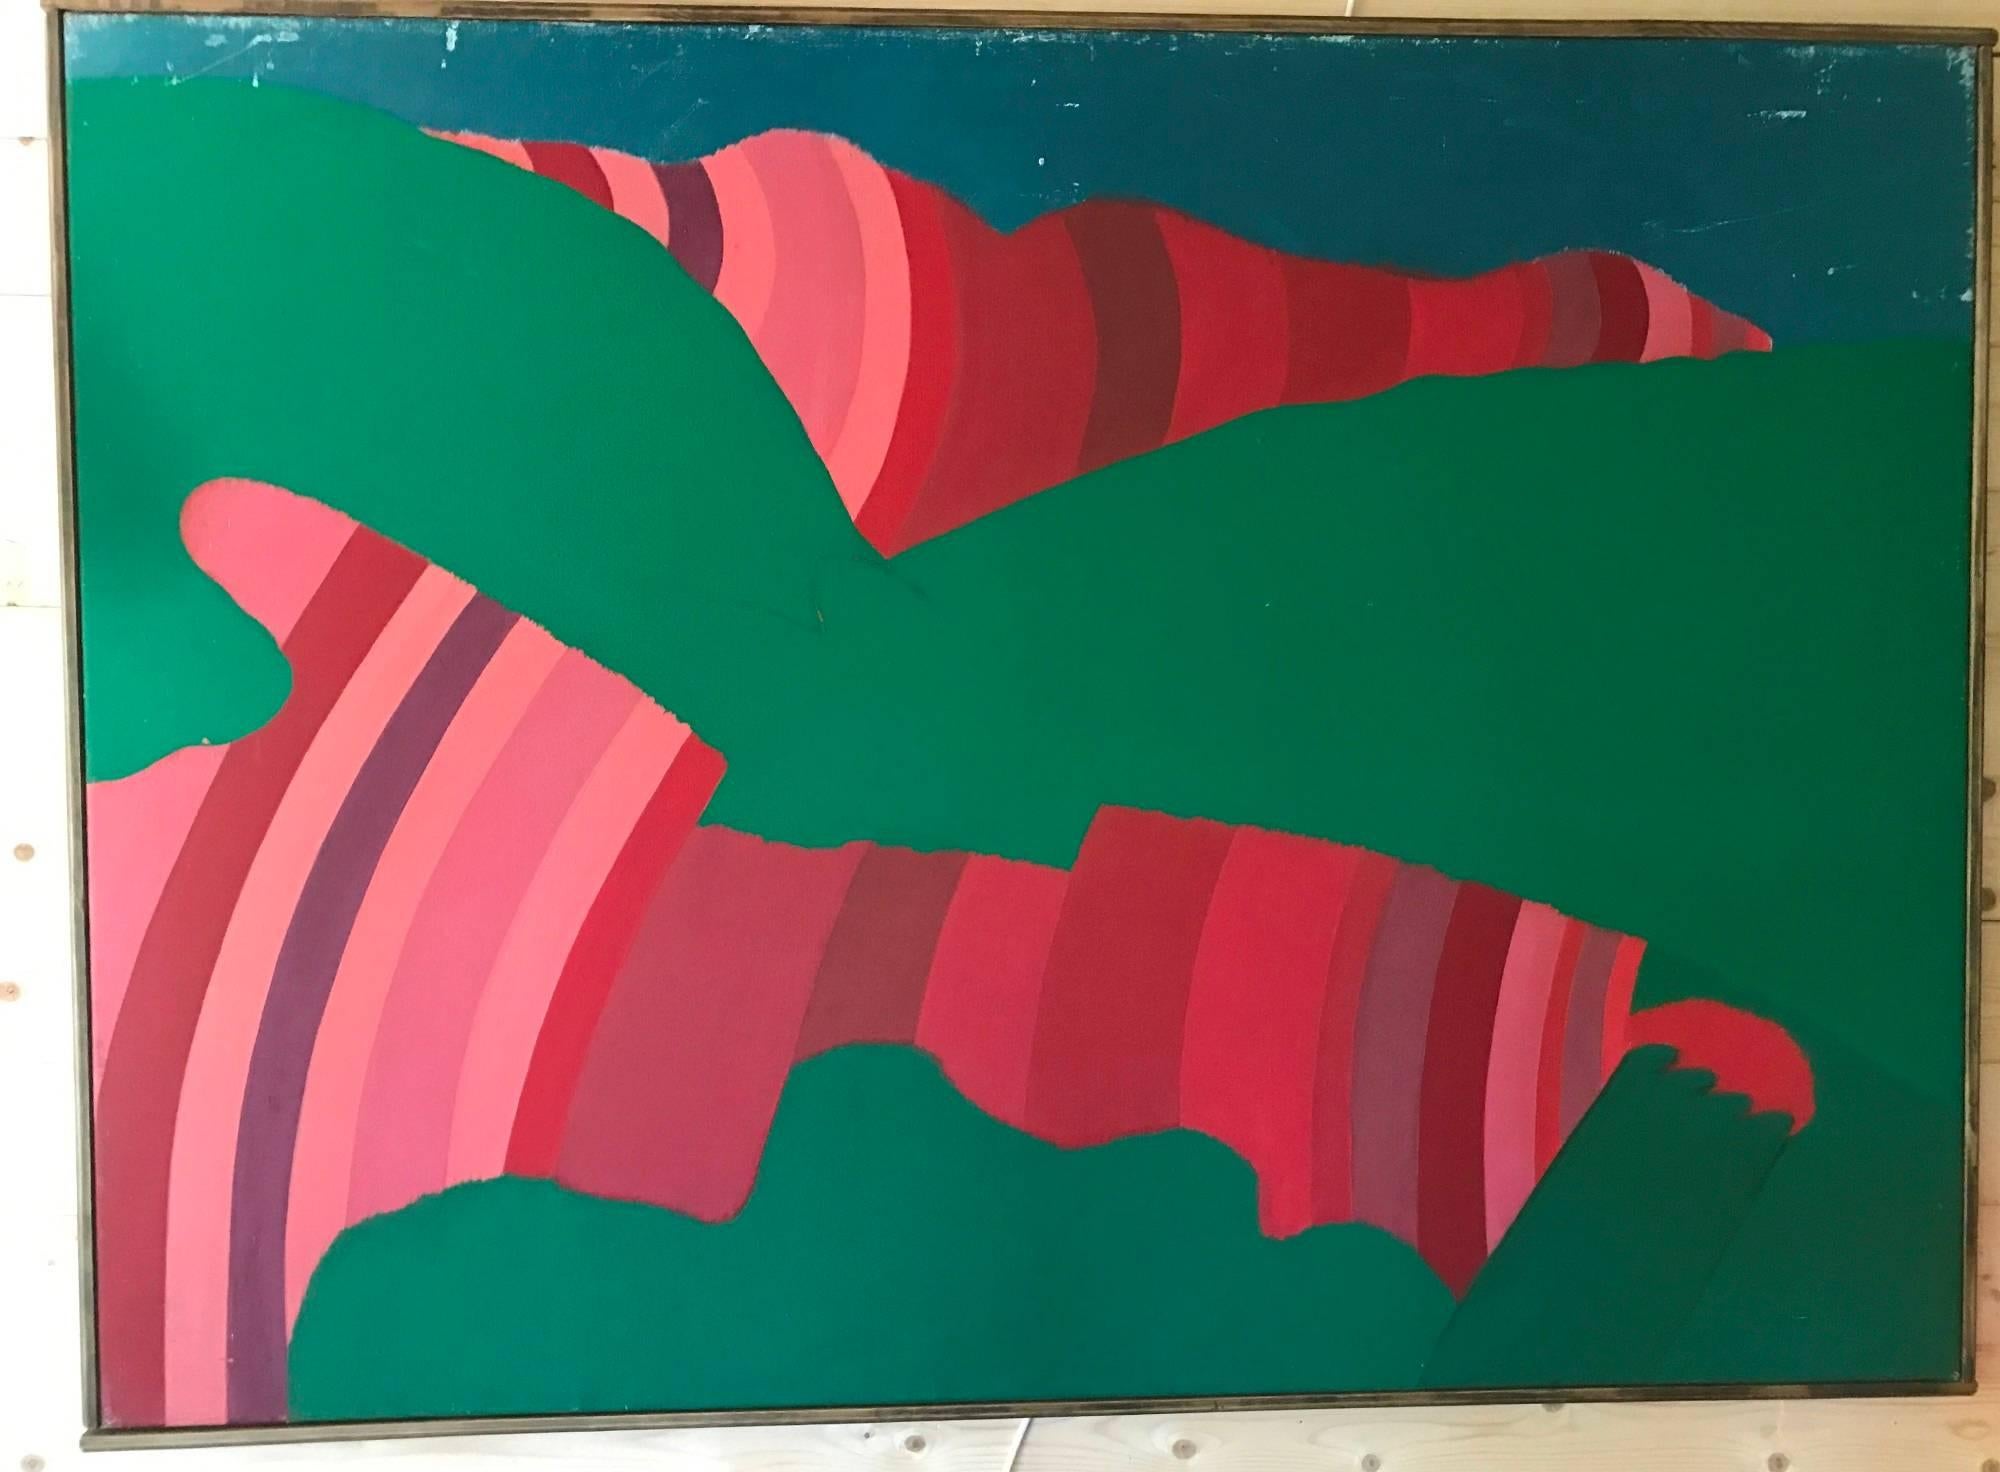 A large colourful and striking colourful abstract. Oil or acrylic on canvas, signed verso Heath on the stretcher. Some surface scratches to the paint but otherwise in good condition. Simply framed.